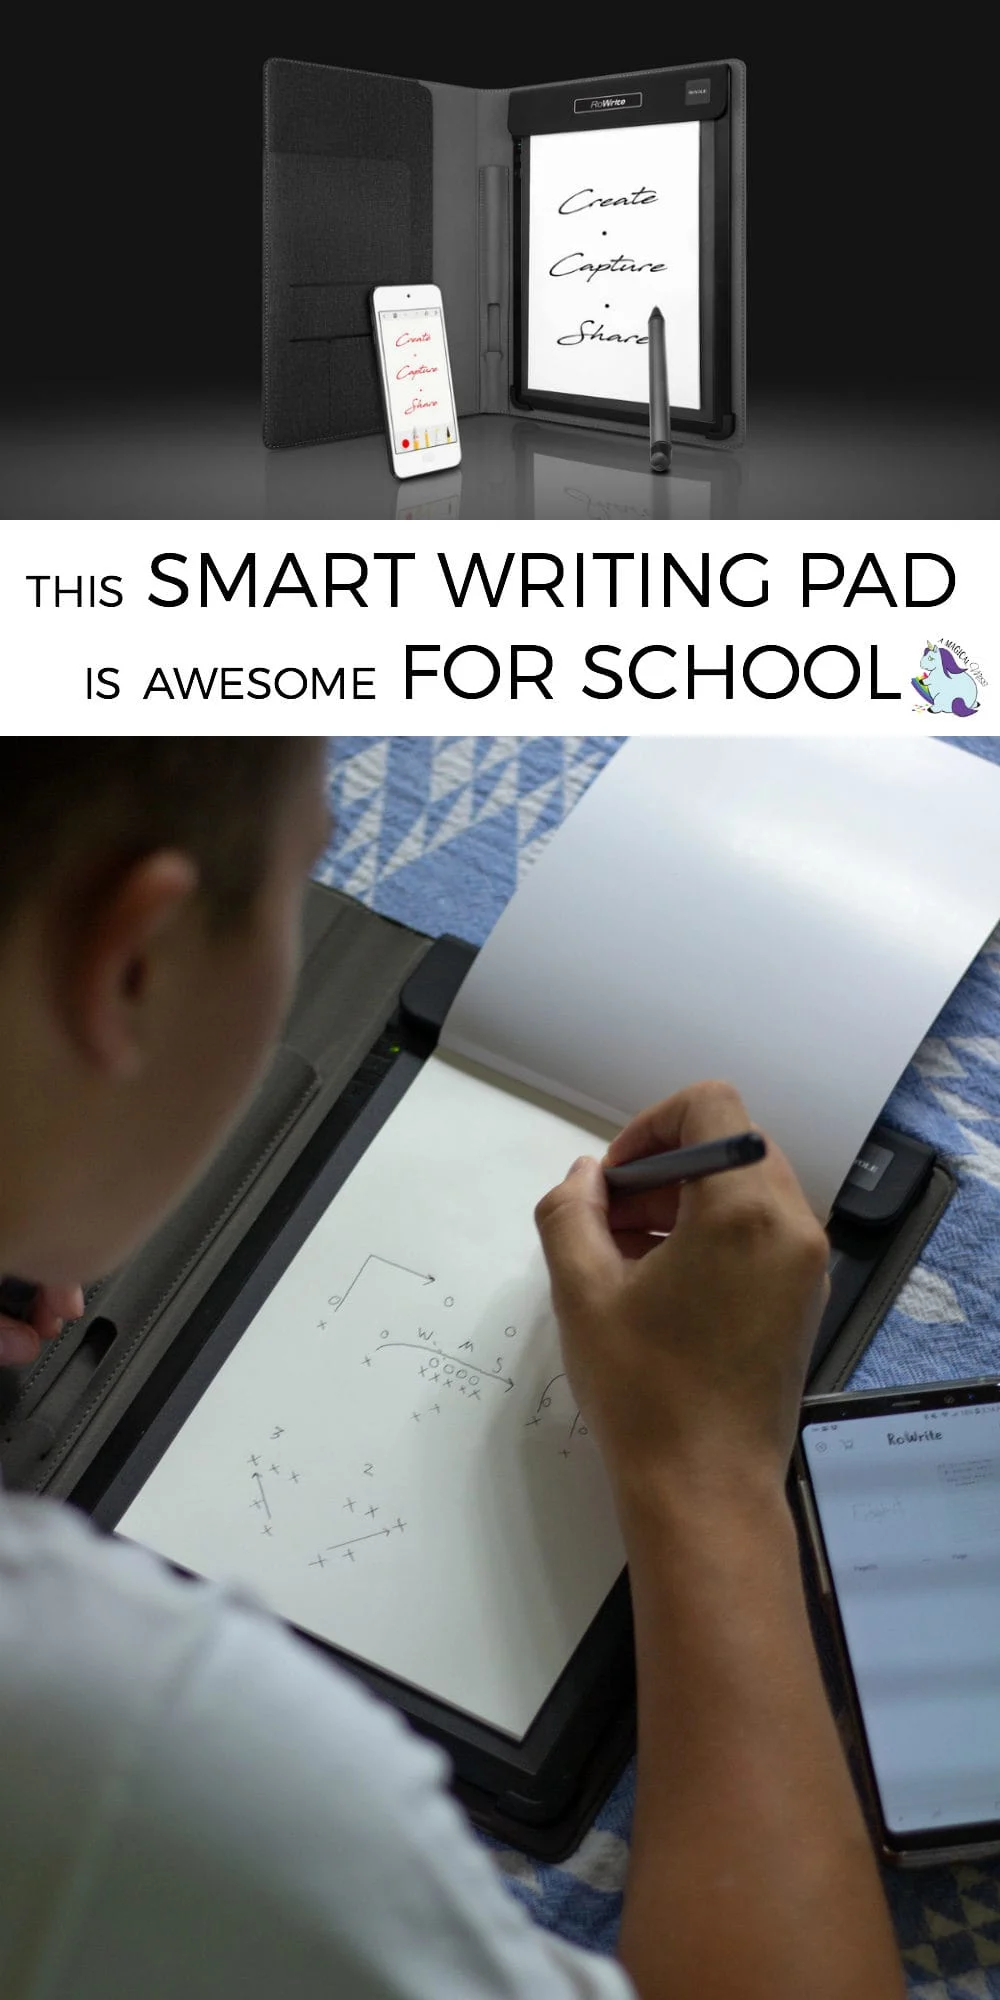 This smart writing pad is incredible! It takes your handwriting and makes it editable digitally!